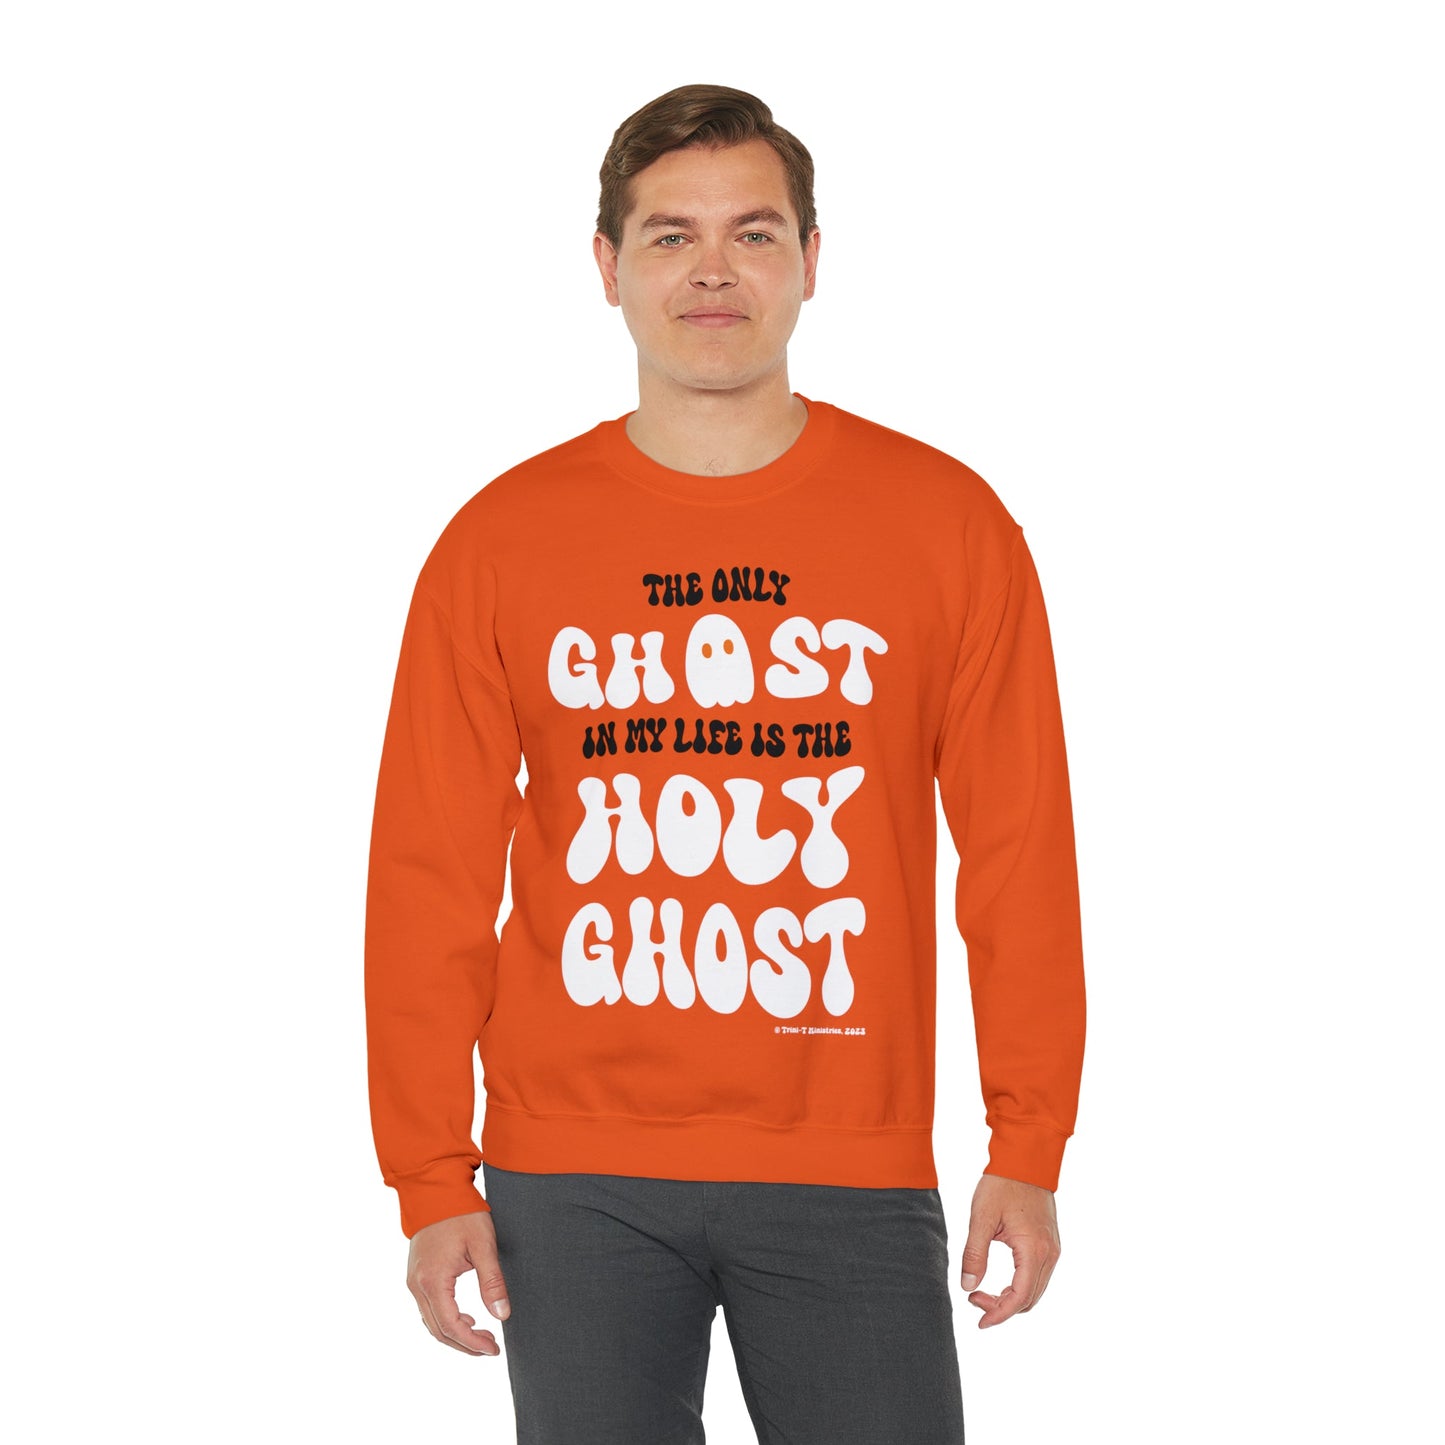 Only Holy Ghost - Sweatshirt - Trini-T Ministries